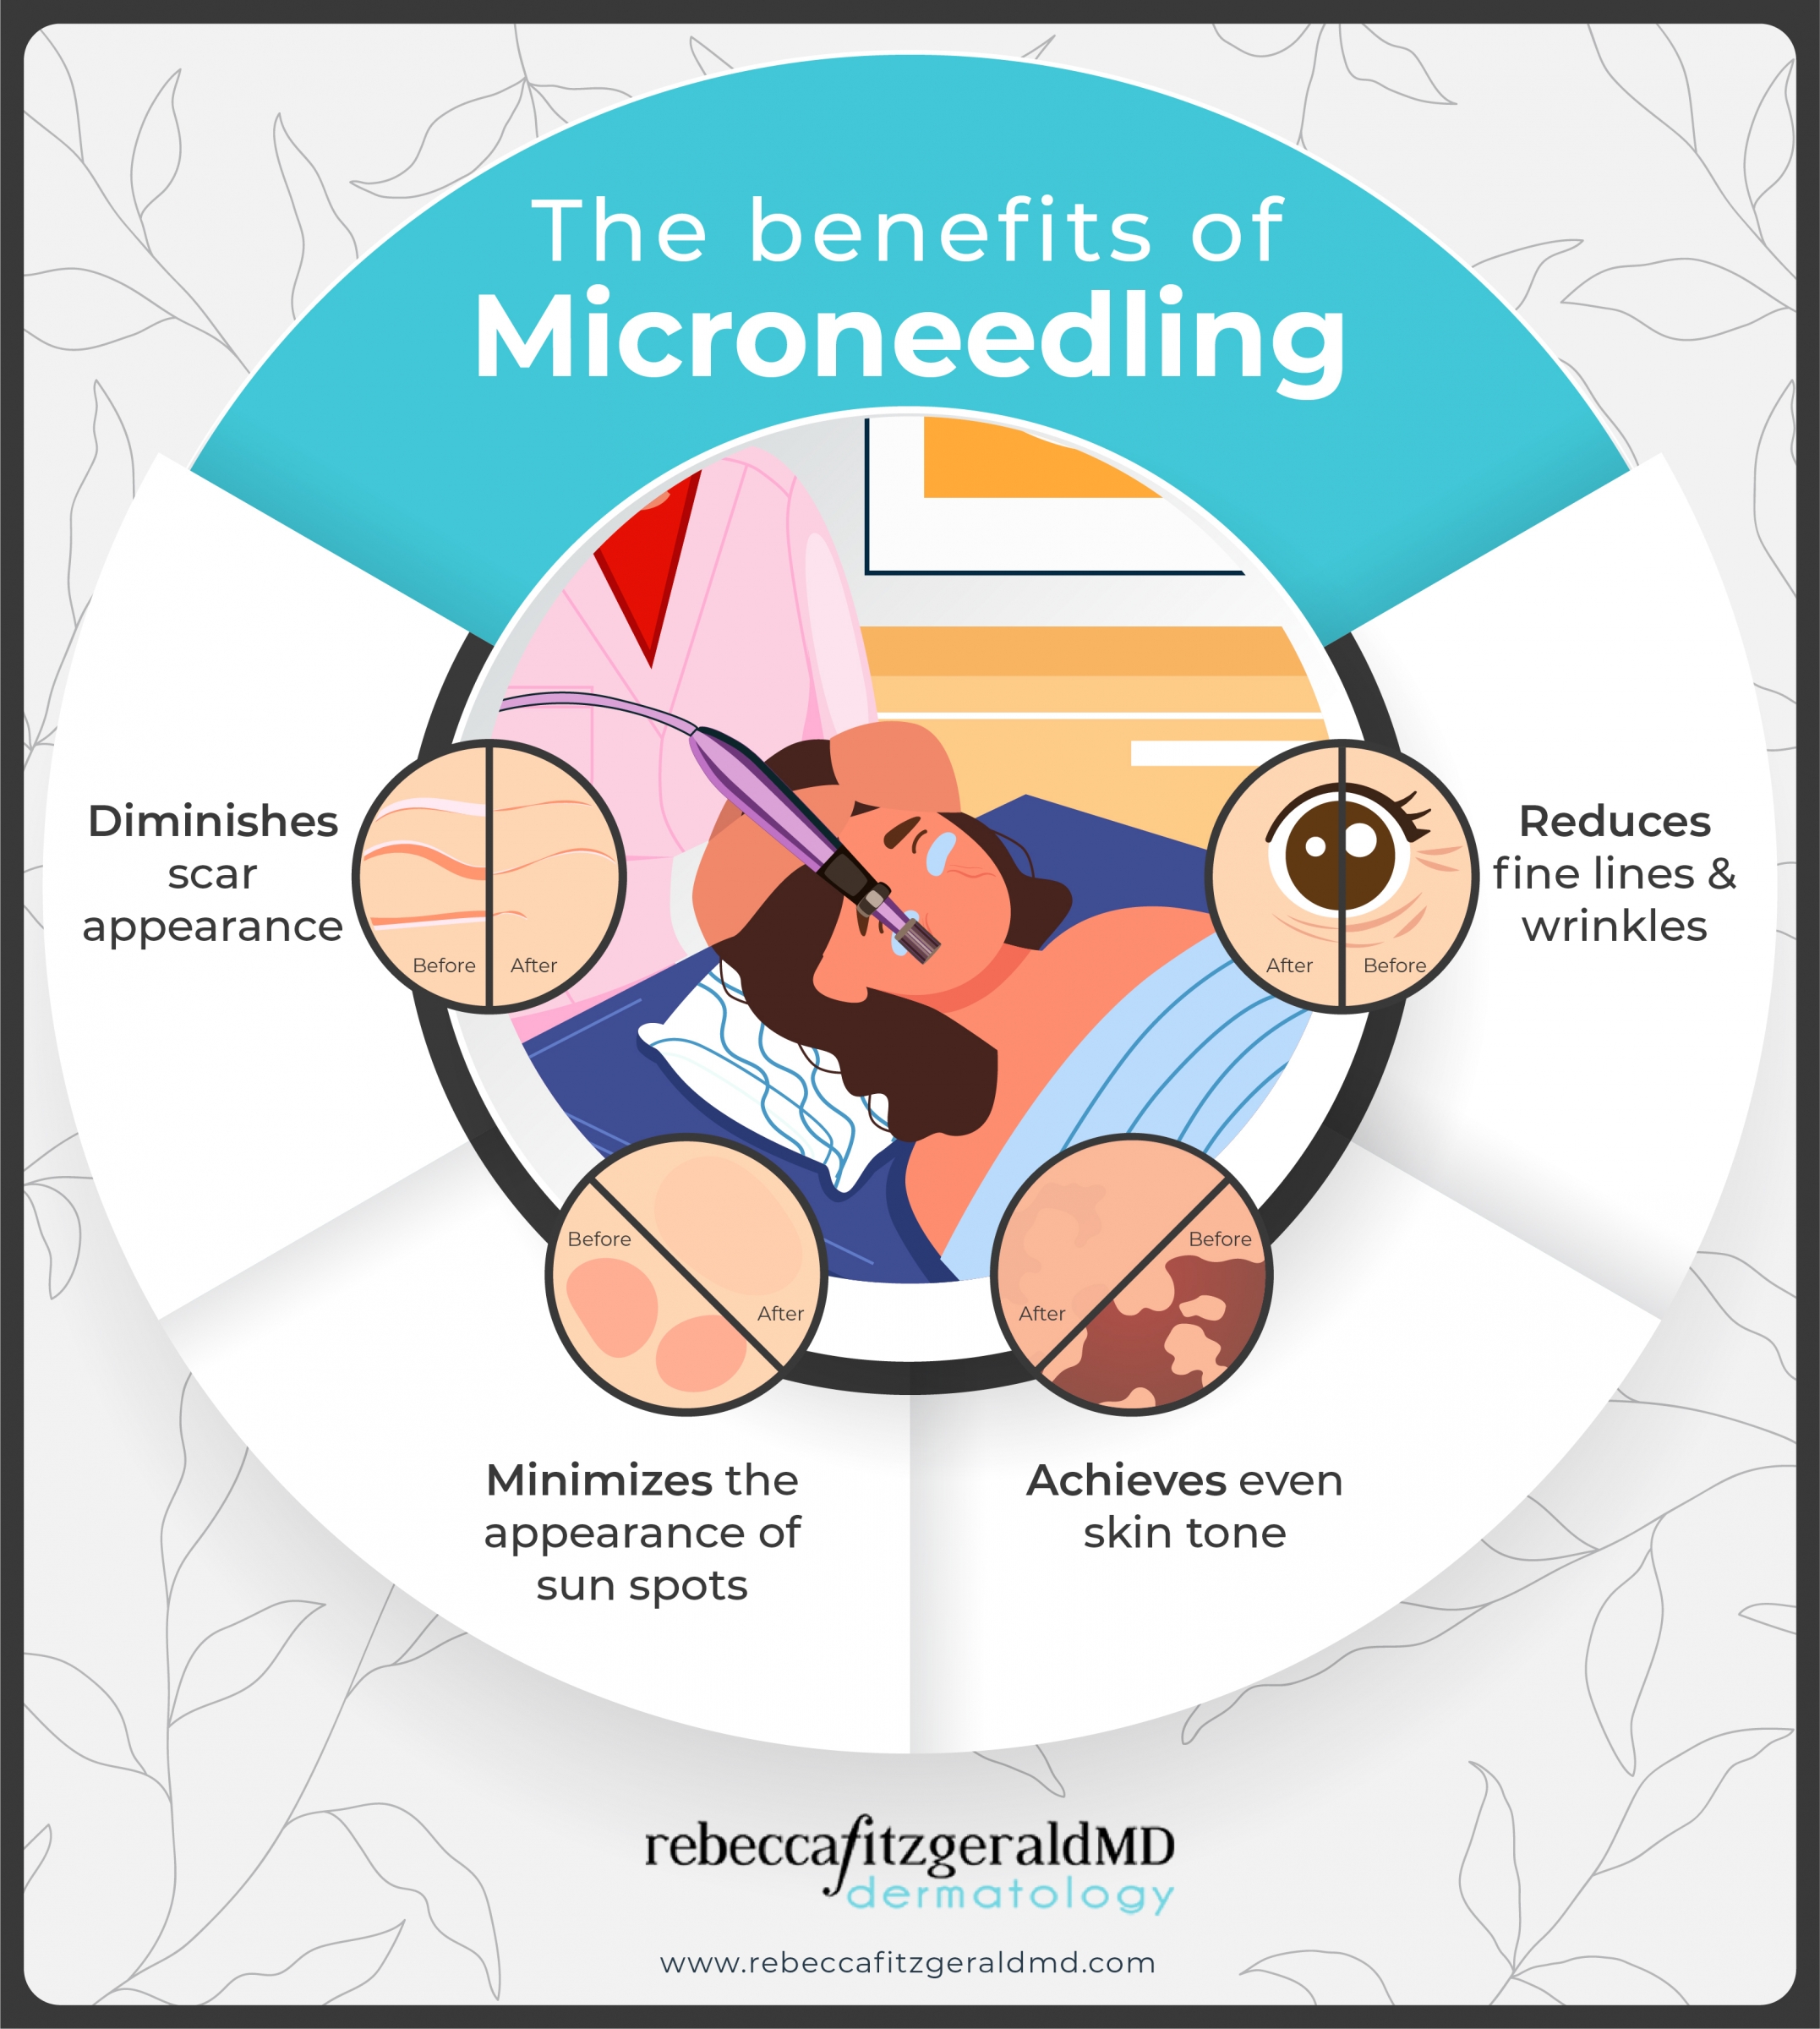 An infographic showing a cartoon woman getting a skin treatment and listing the benefits of microneeding including diminishing scar, minimizing sun spots, evening skin tone and reducing fine lines